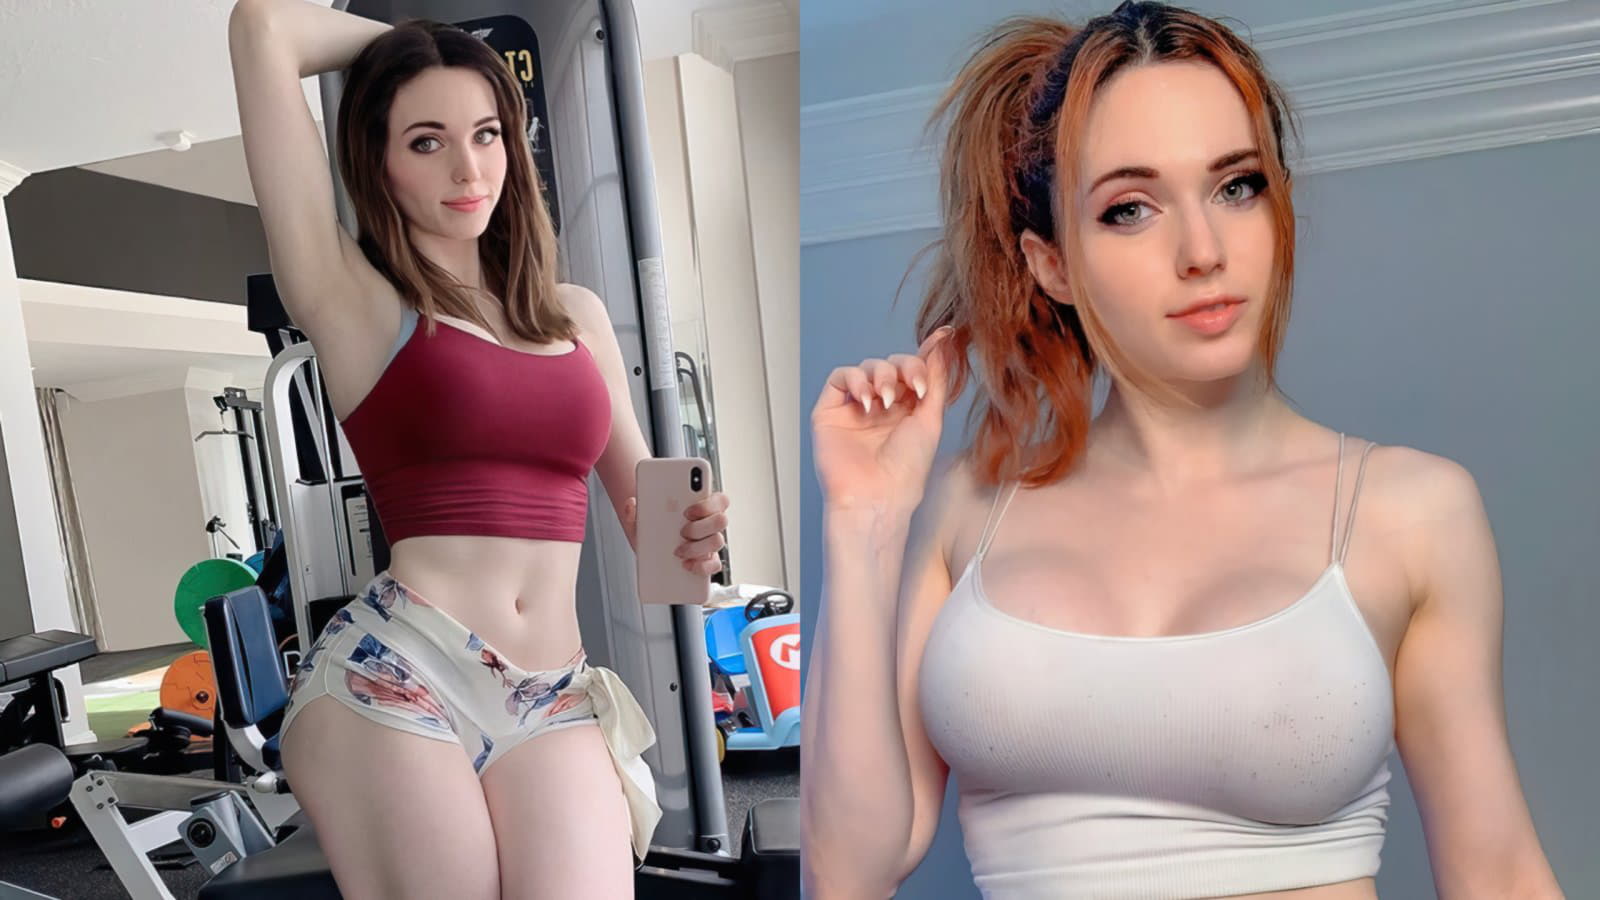 Streamer with onlyfans